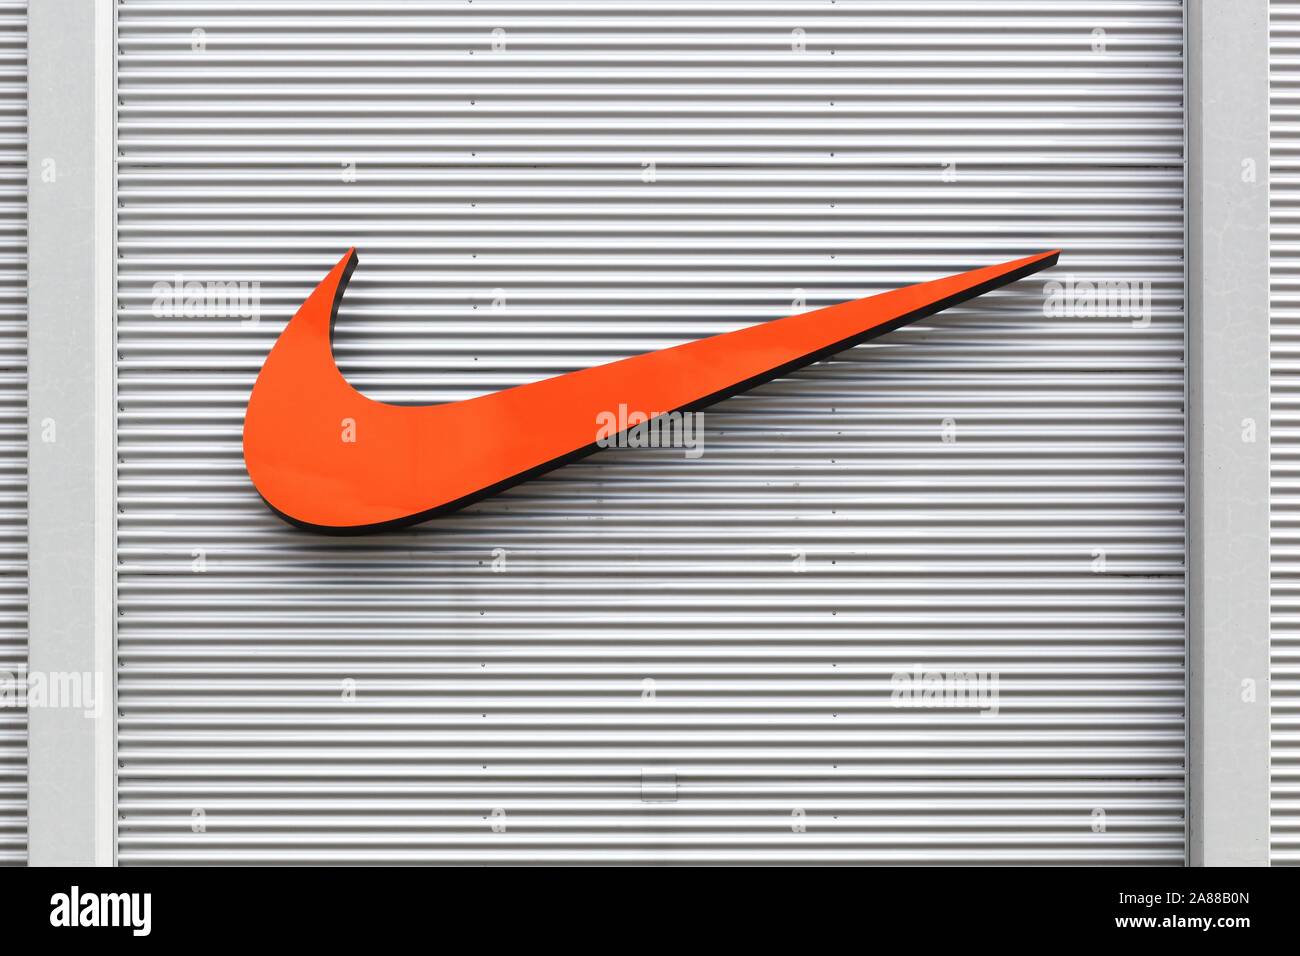 Bremen, Germany - July 2, 2017: Nike logo on a facade of a store. Nike is an American company specializing in sports equipment based in Beaverton, USA Stock Photo